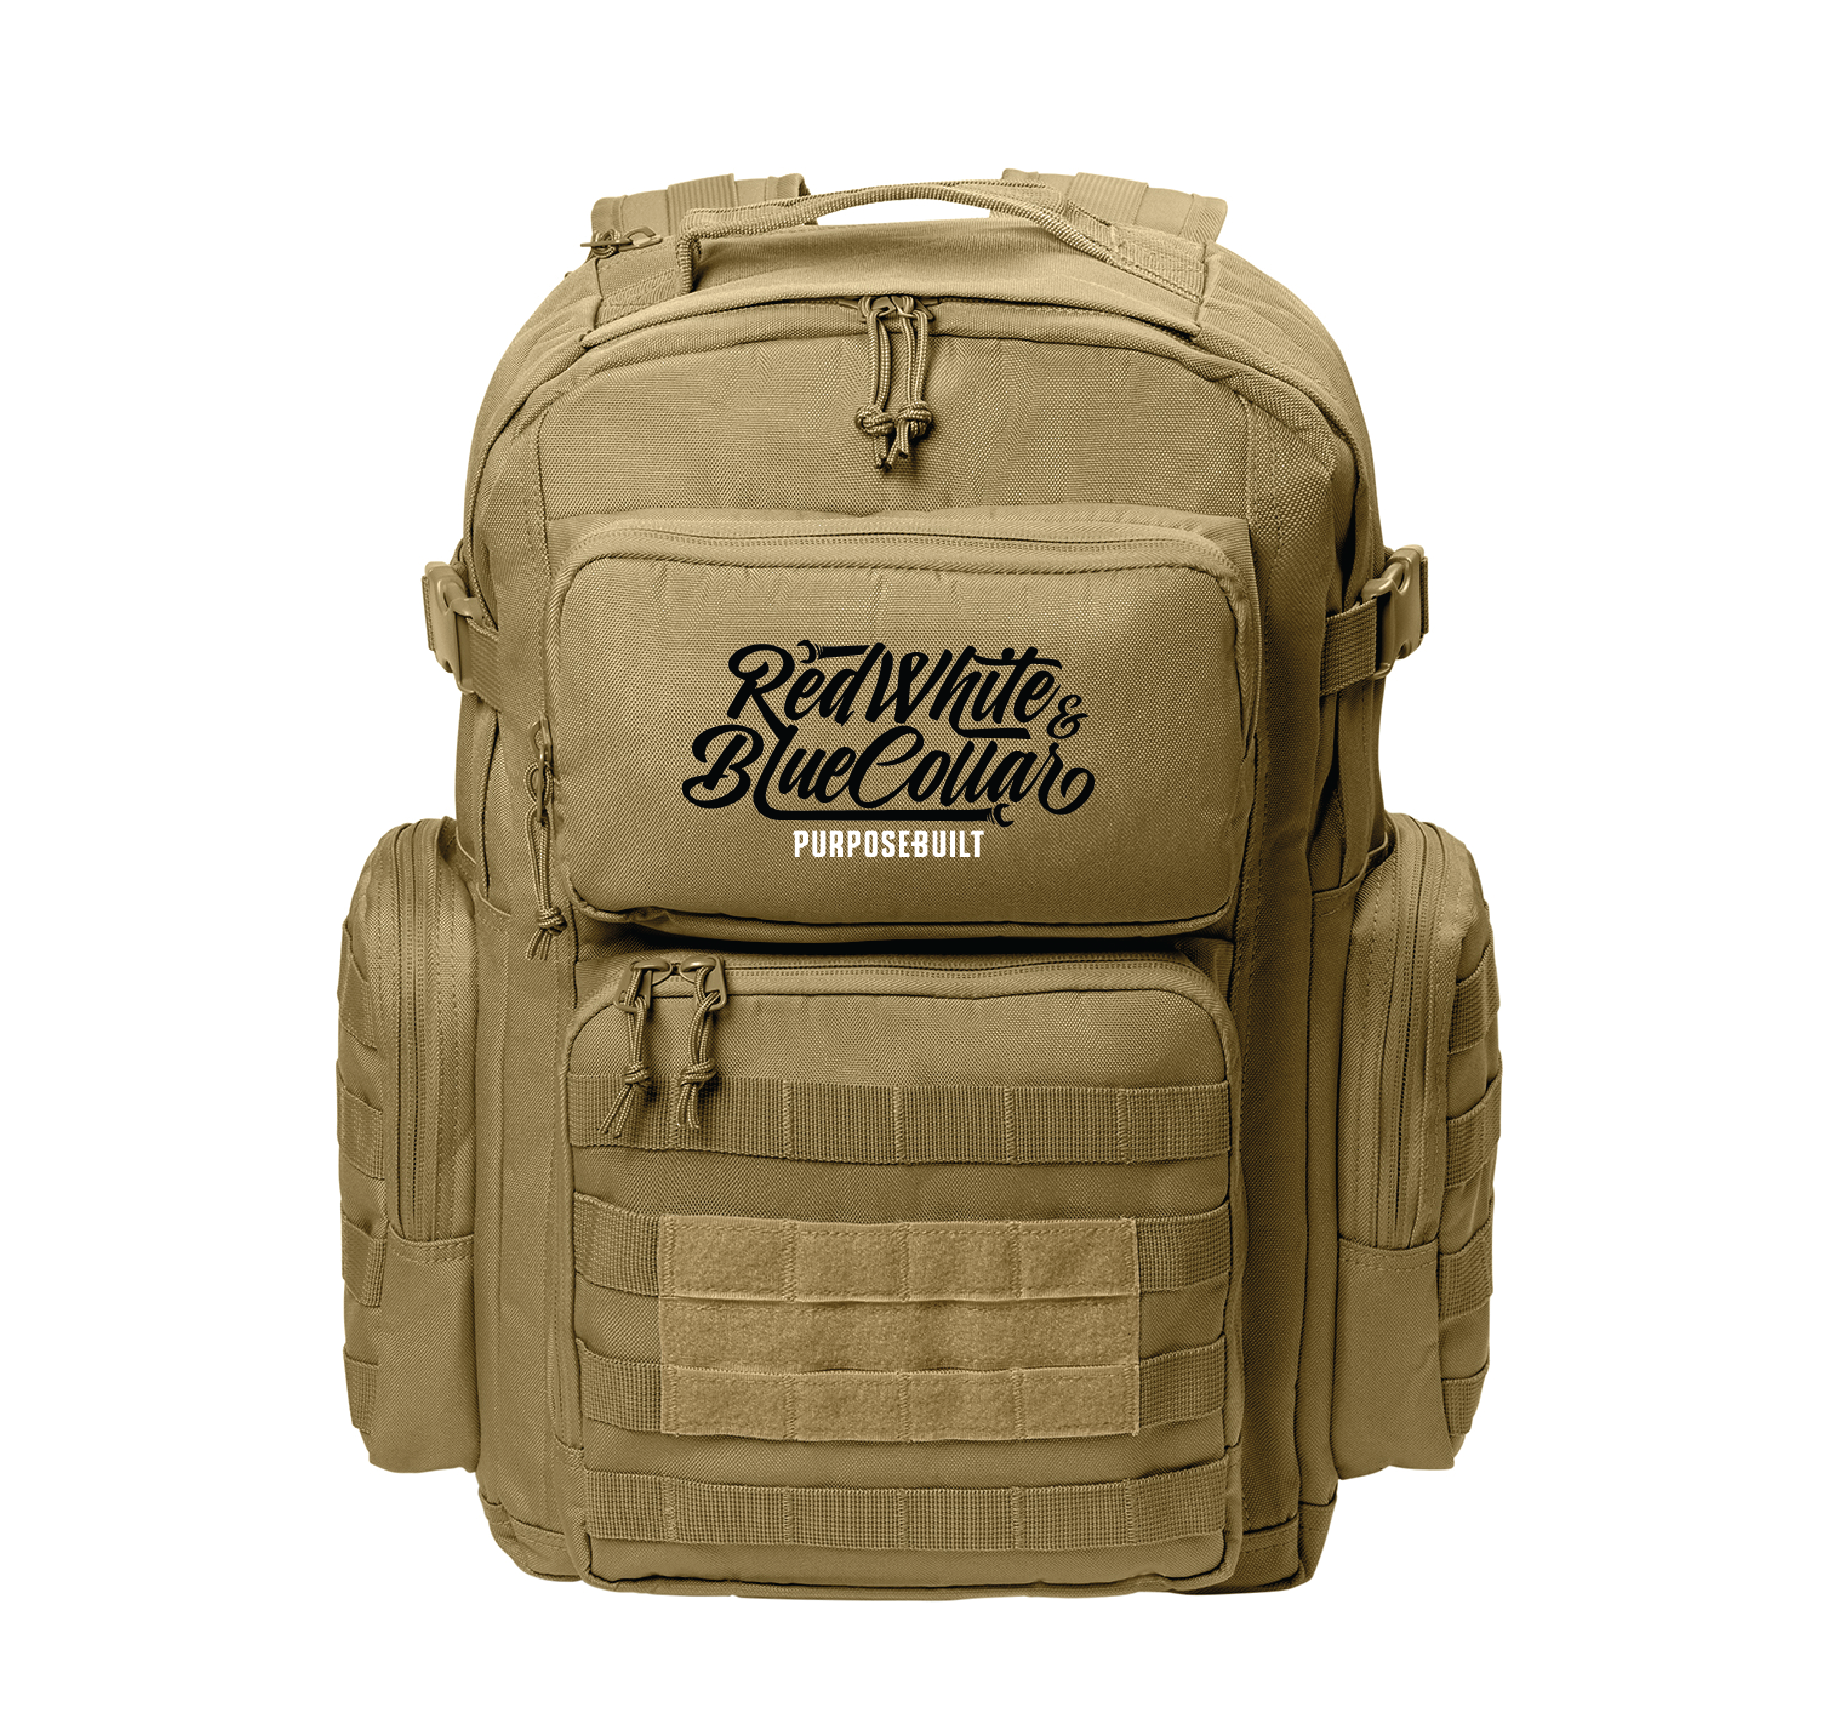 The O.G. Trade Backpack, Coyote